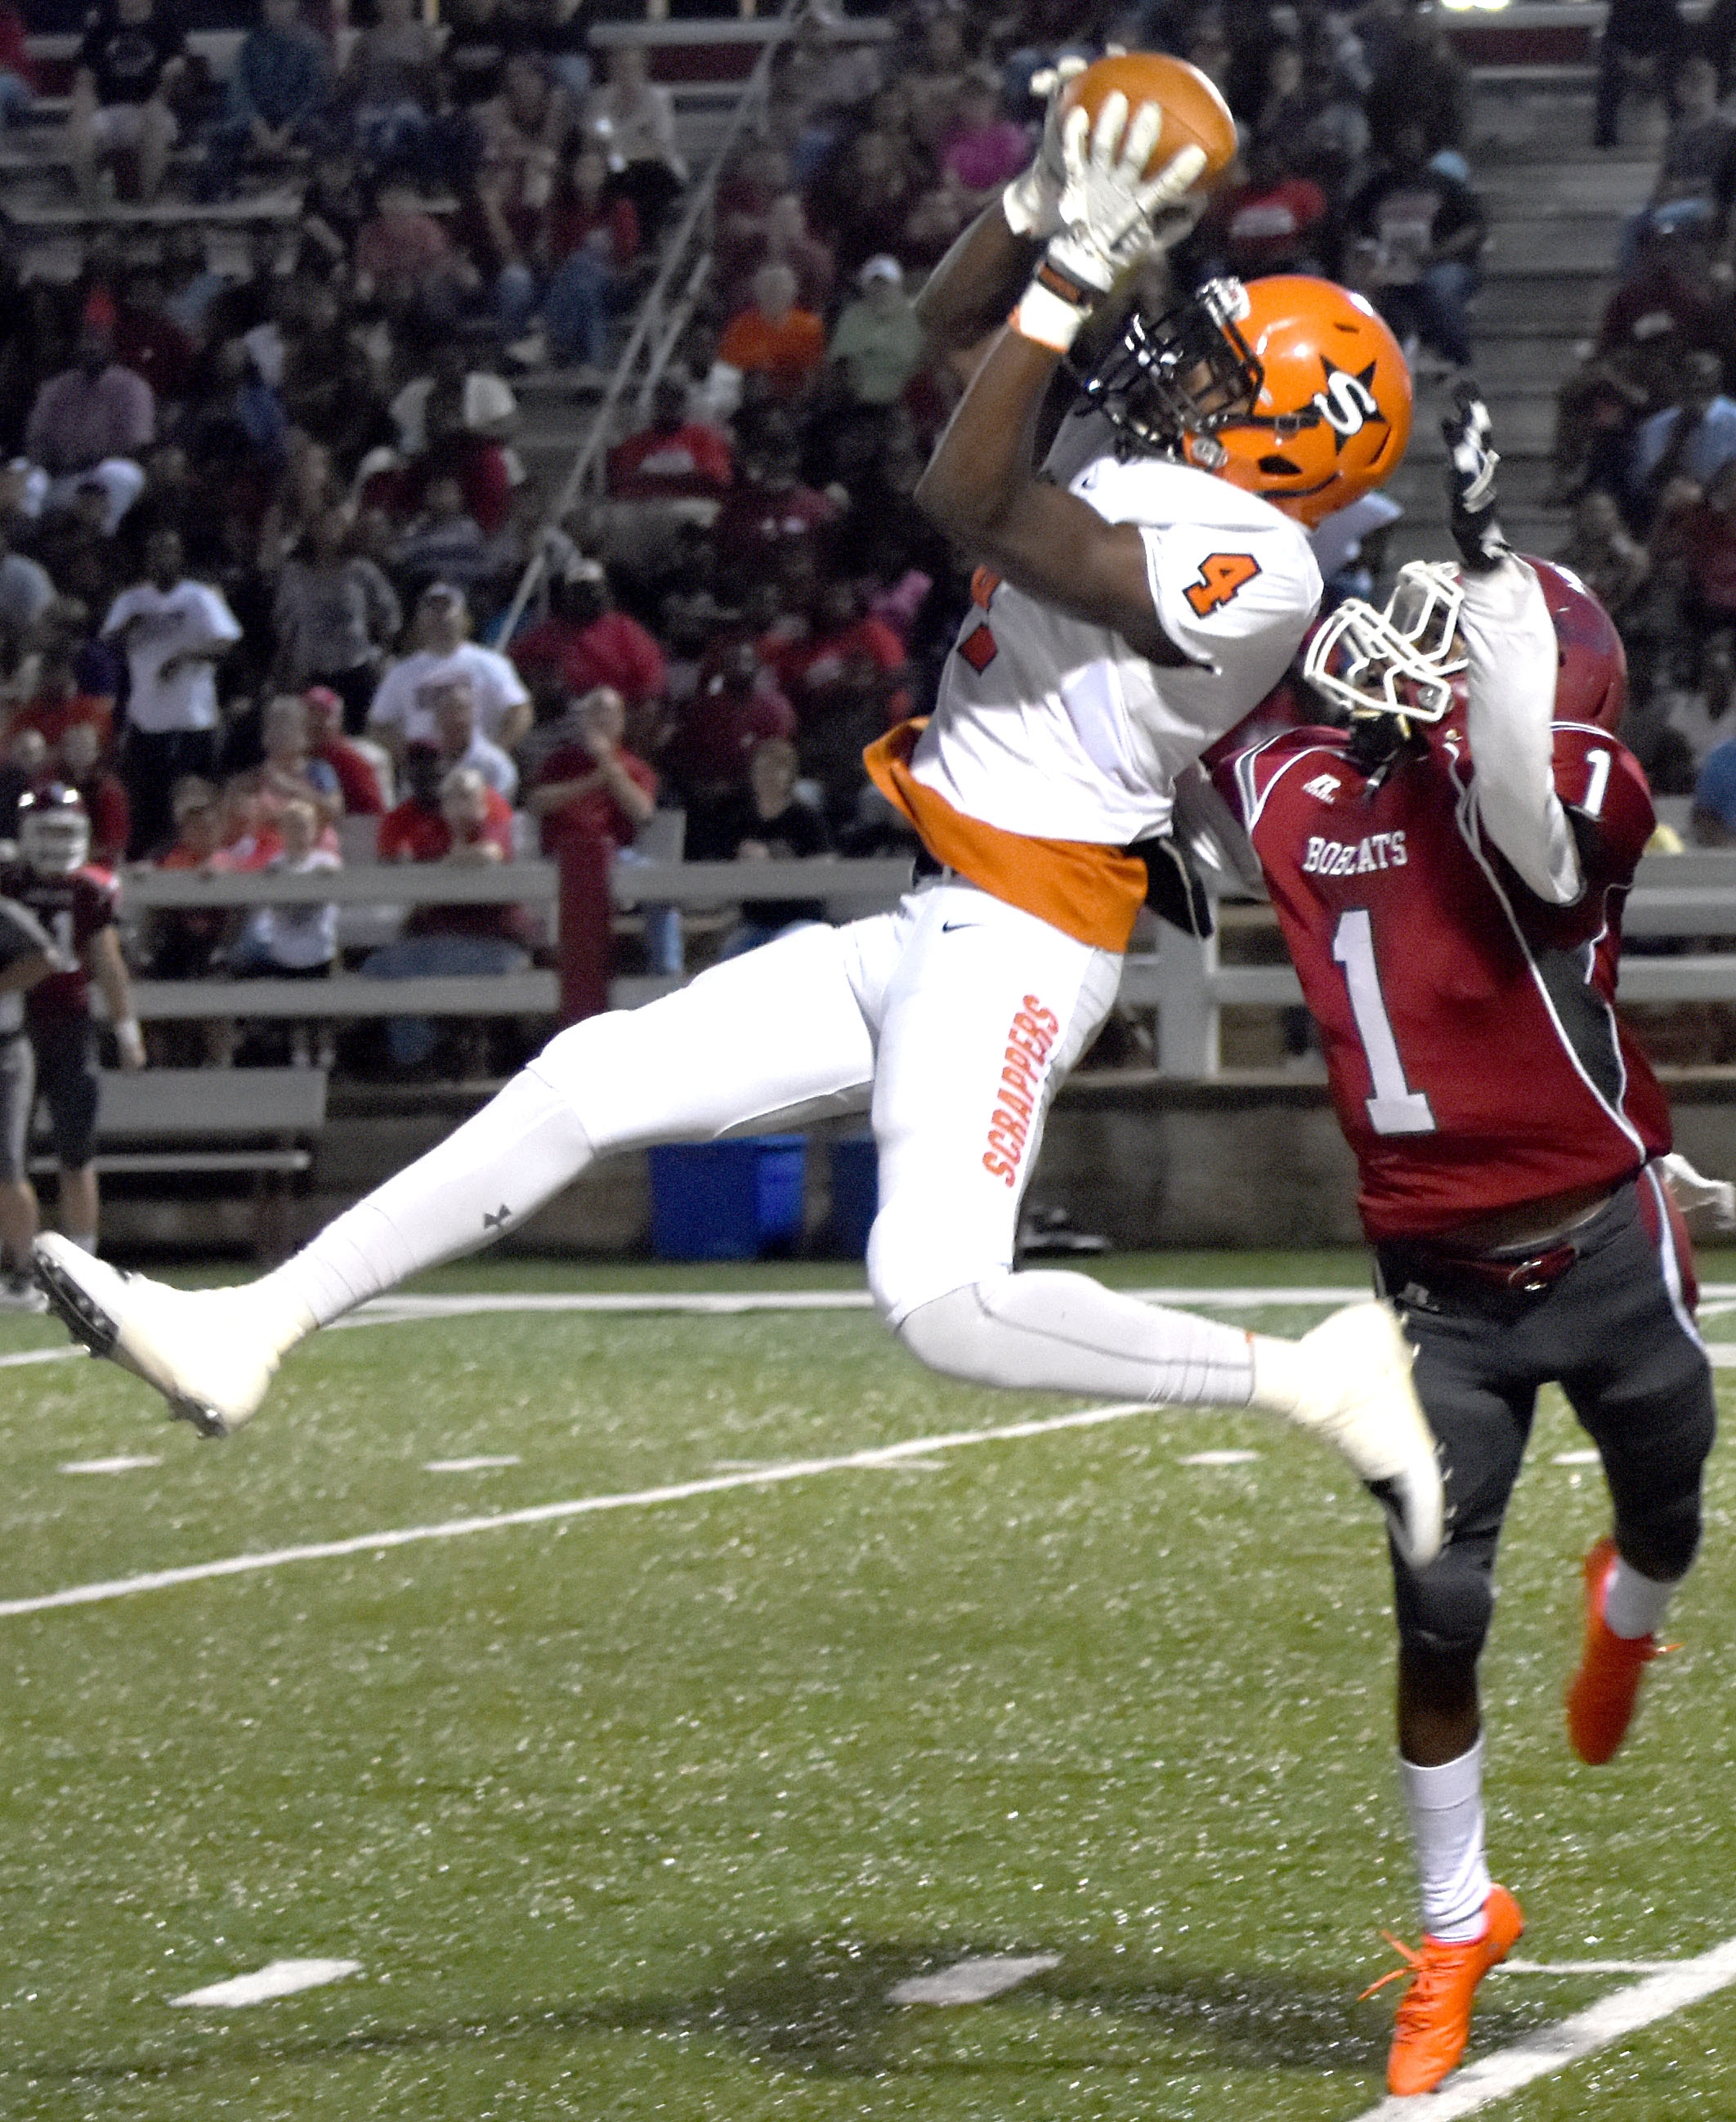 Ty Pettway (4) makes a leaping catch over Bobcat defender Charles Horton in Friday night's Scrapper victory.